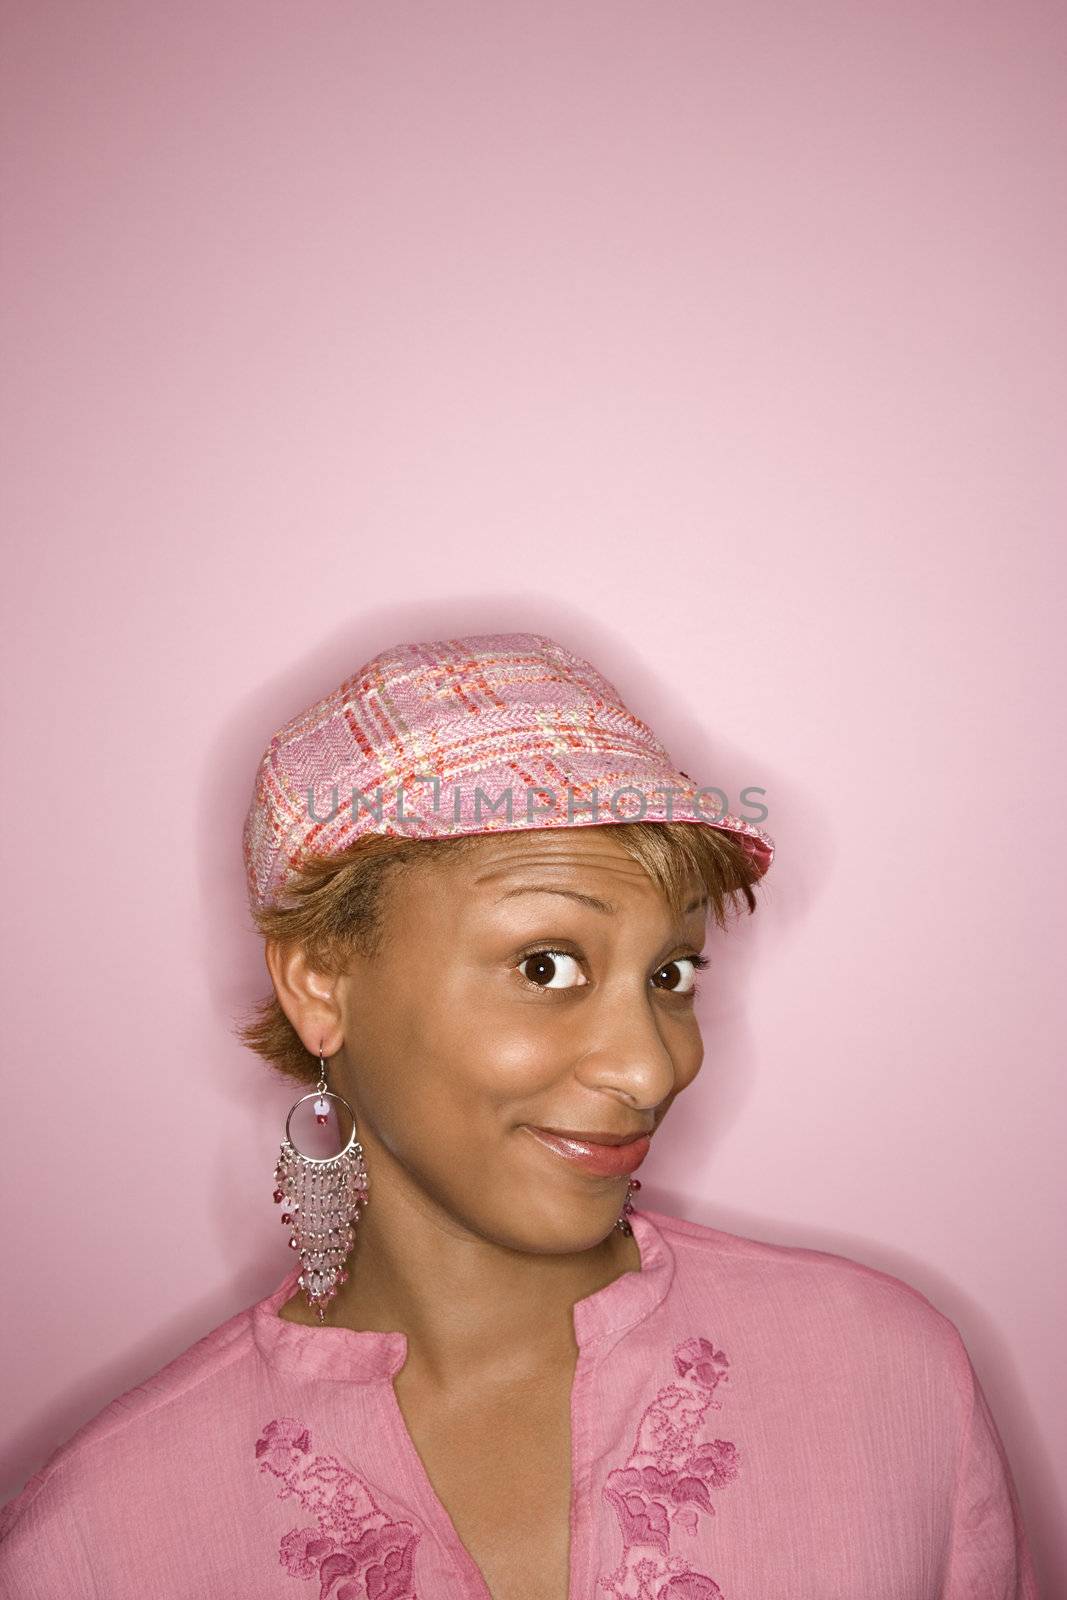 Portrait of young African-American woman on pink background with comical expression on her face.